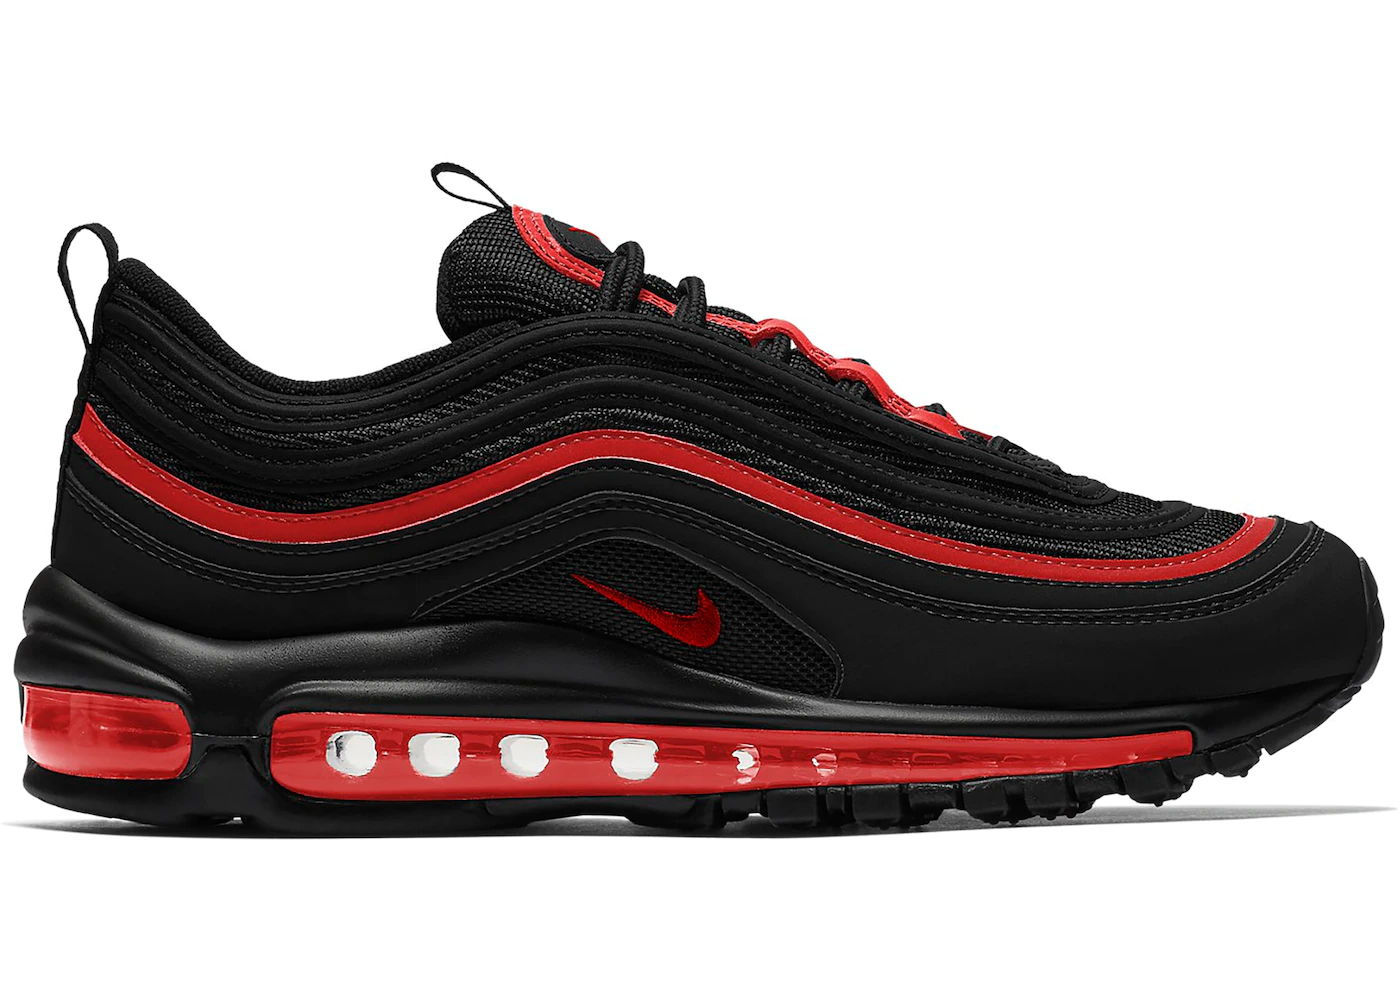 nike-air-max-97-black-chile-red-gs-921522-023